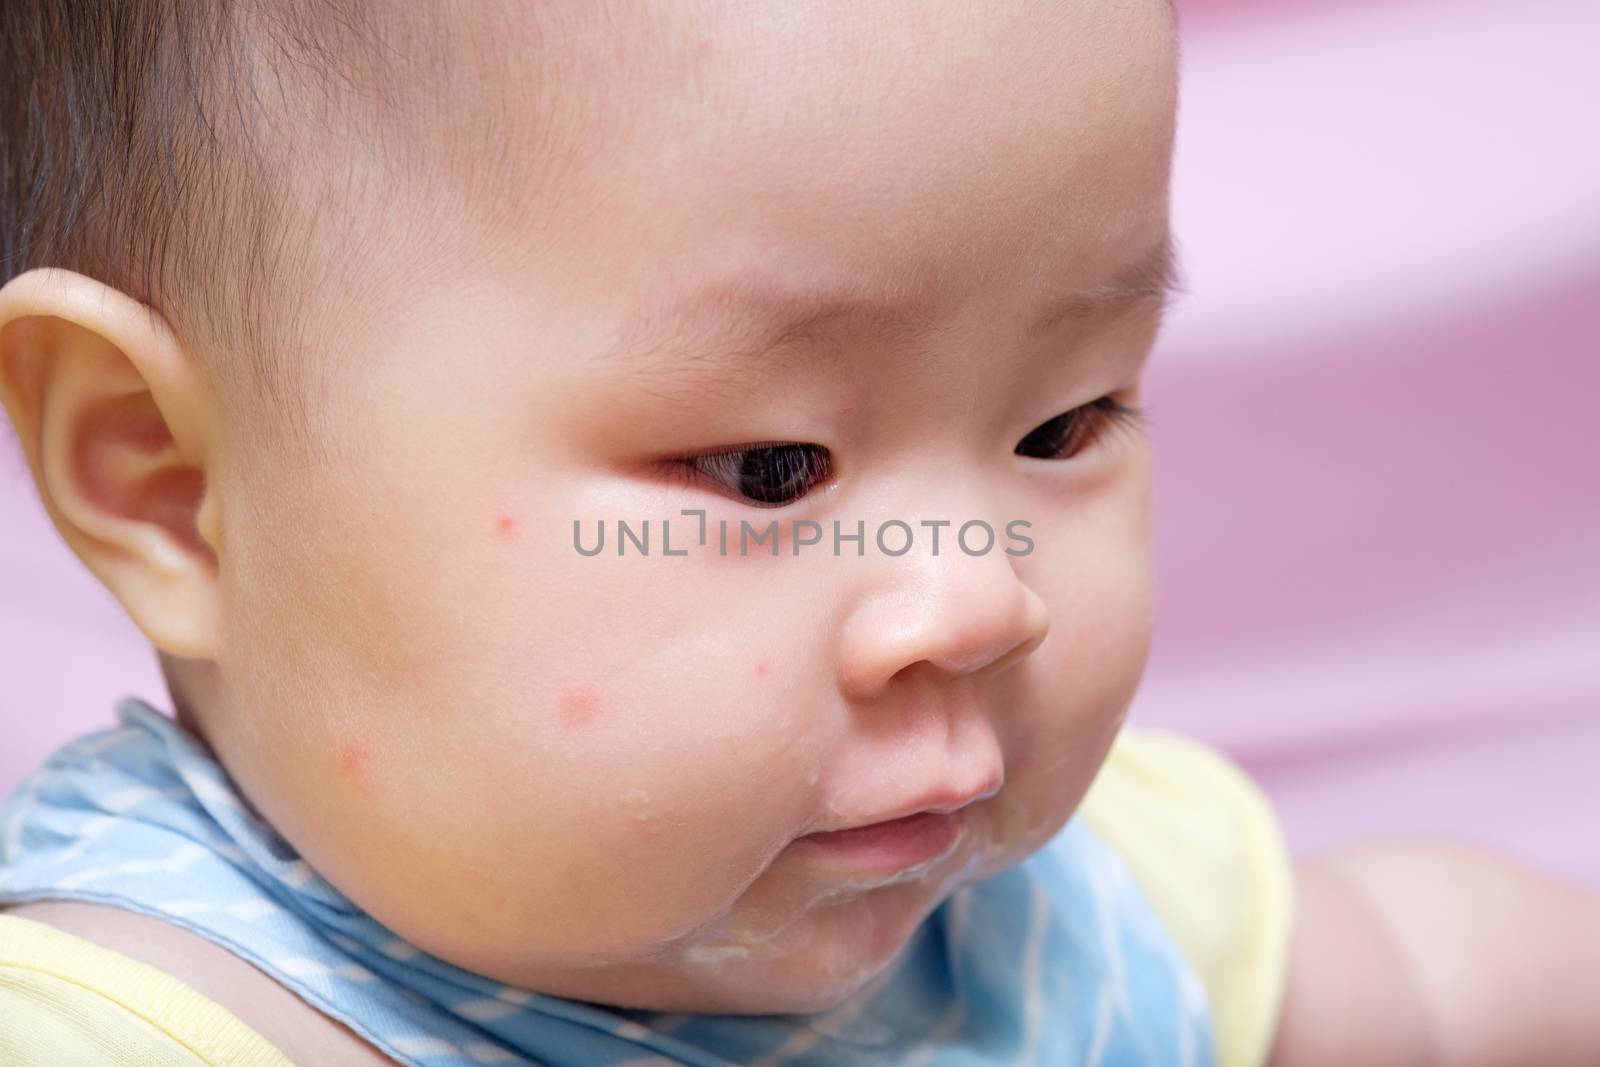 Mosquito bite Asian baby girl by zneb076